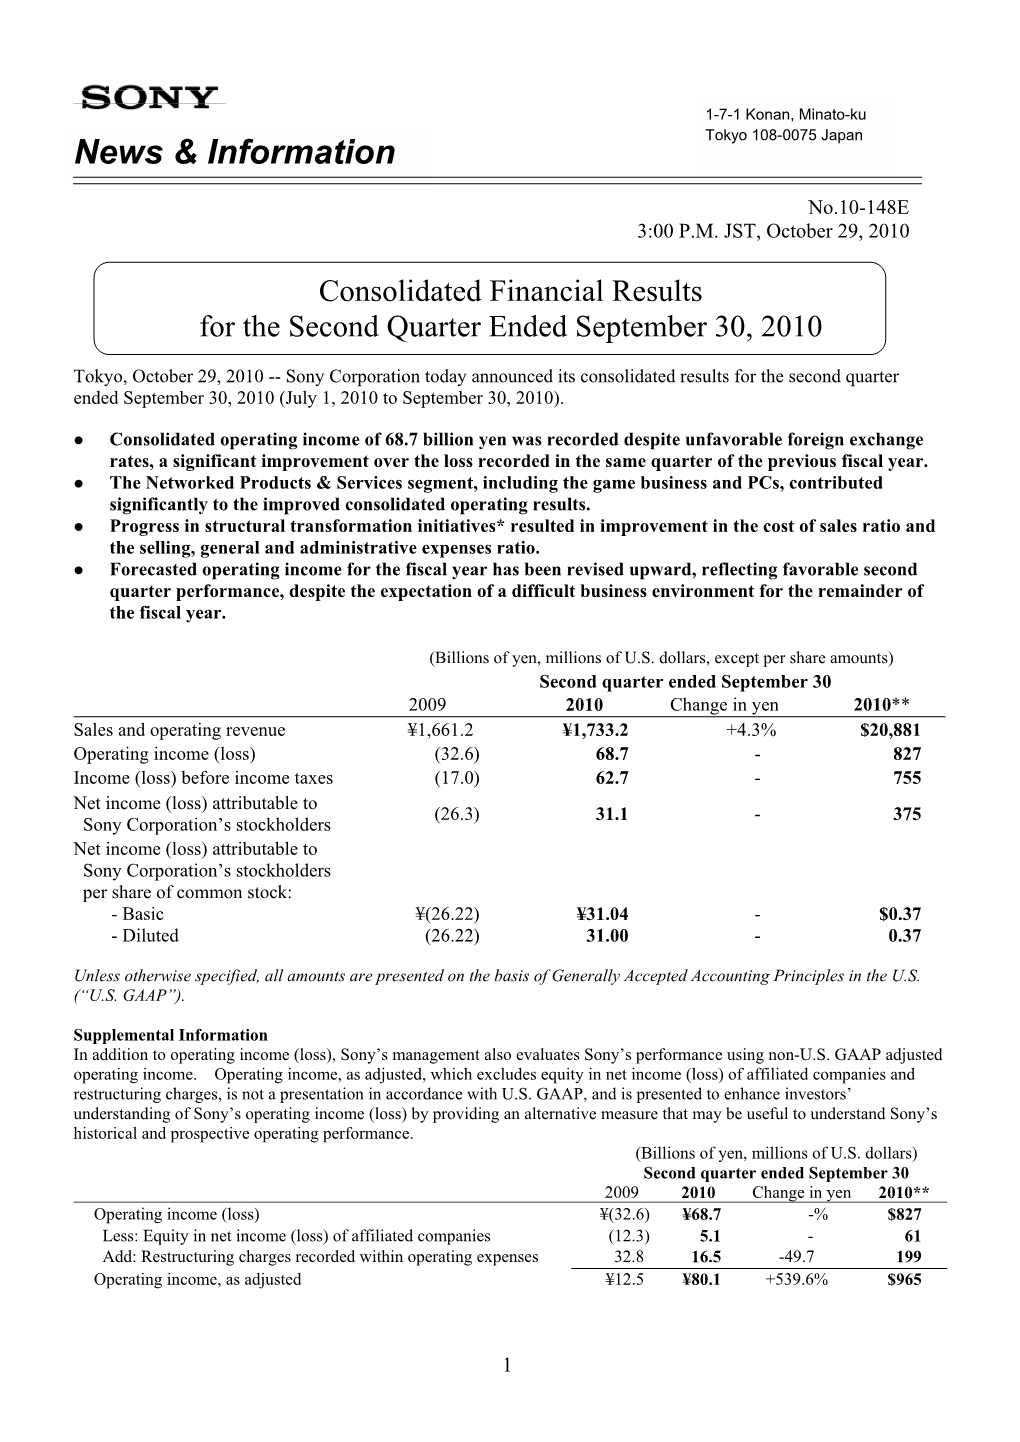 Consolidated Financial Results for the Second Quarter Ended September 30, 2010